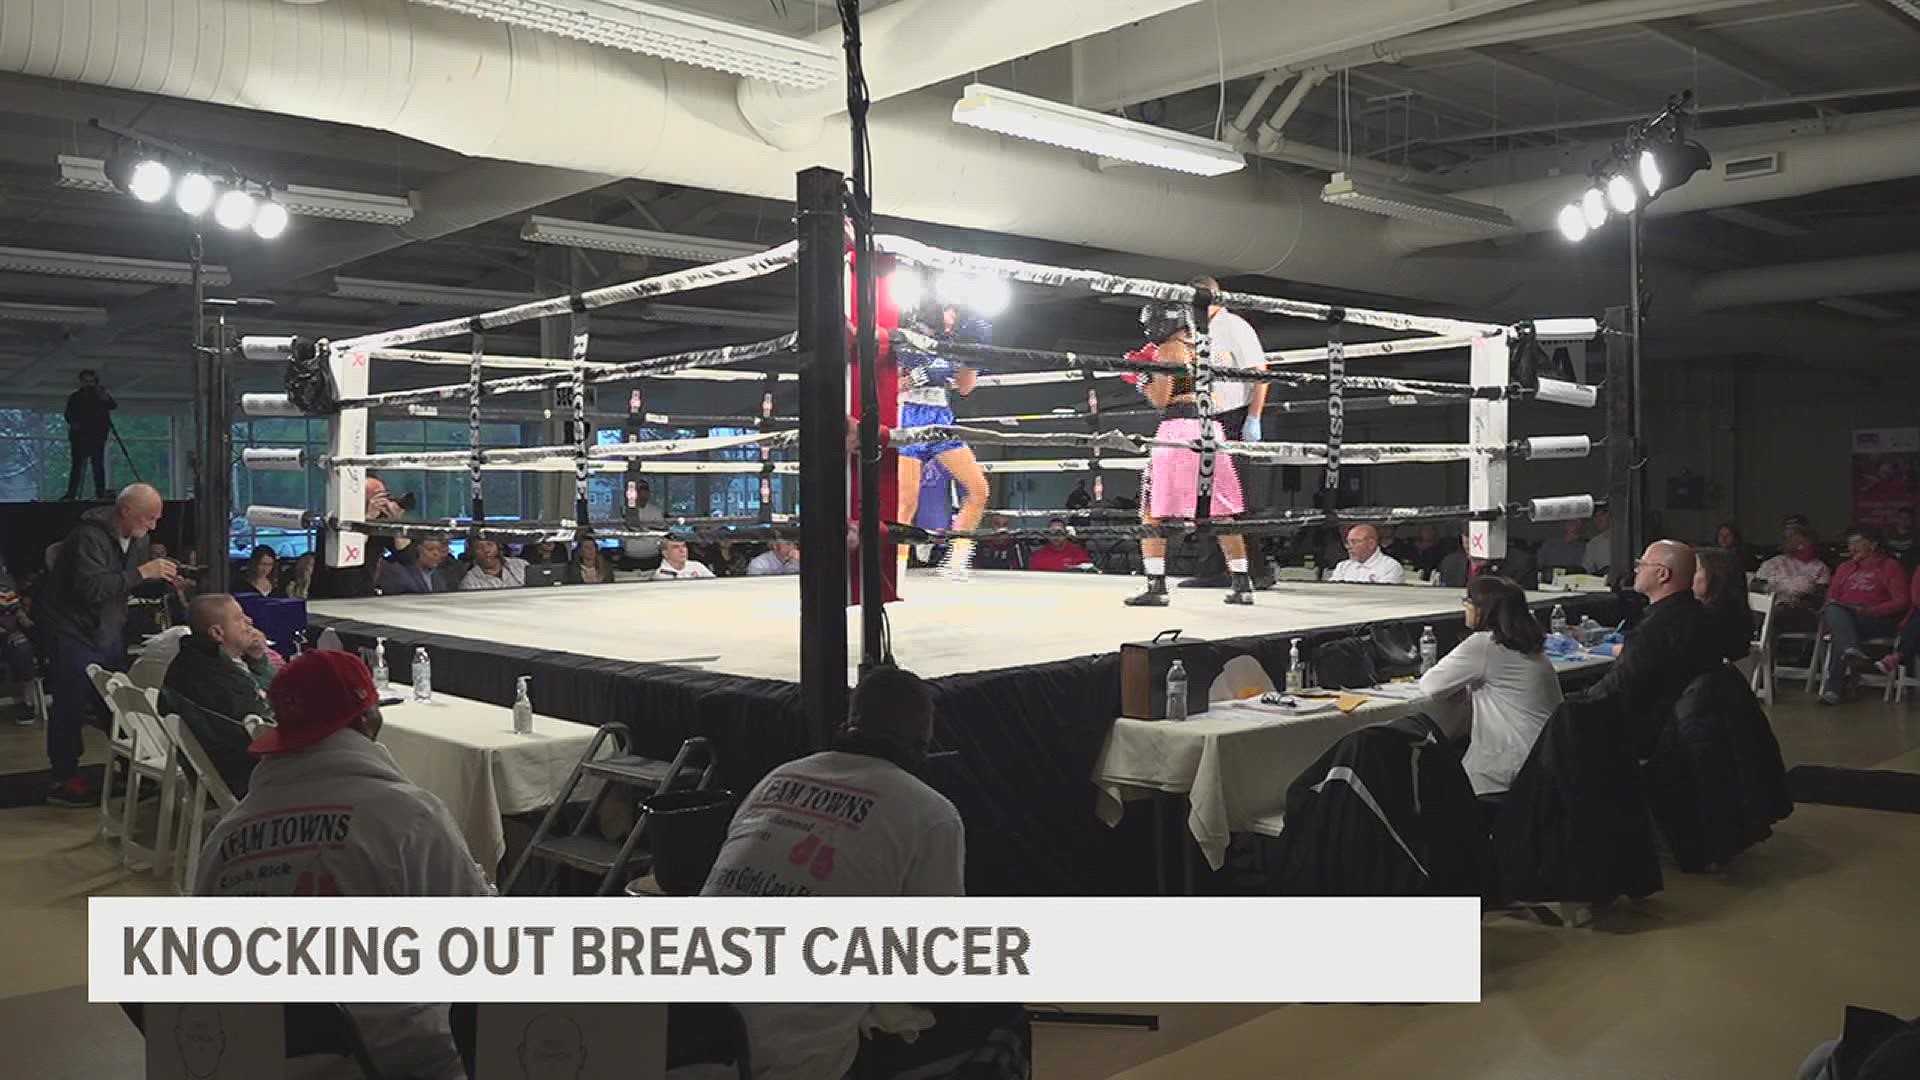 Officials with the event said its purpose wasn't just to raise money, but to raise awareness for annual mammograms as well.